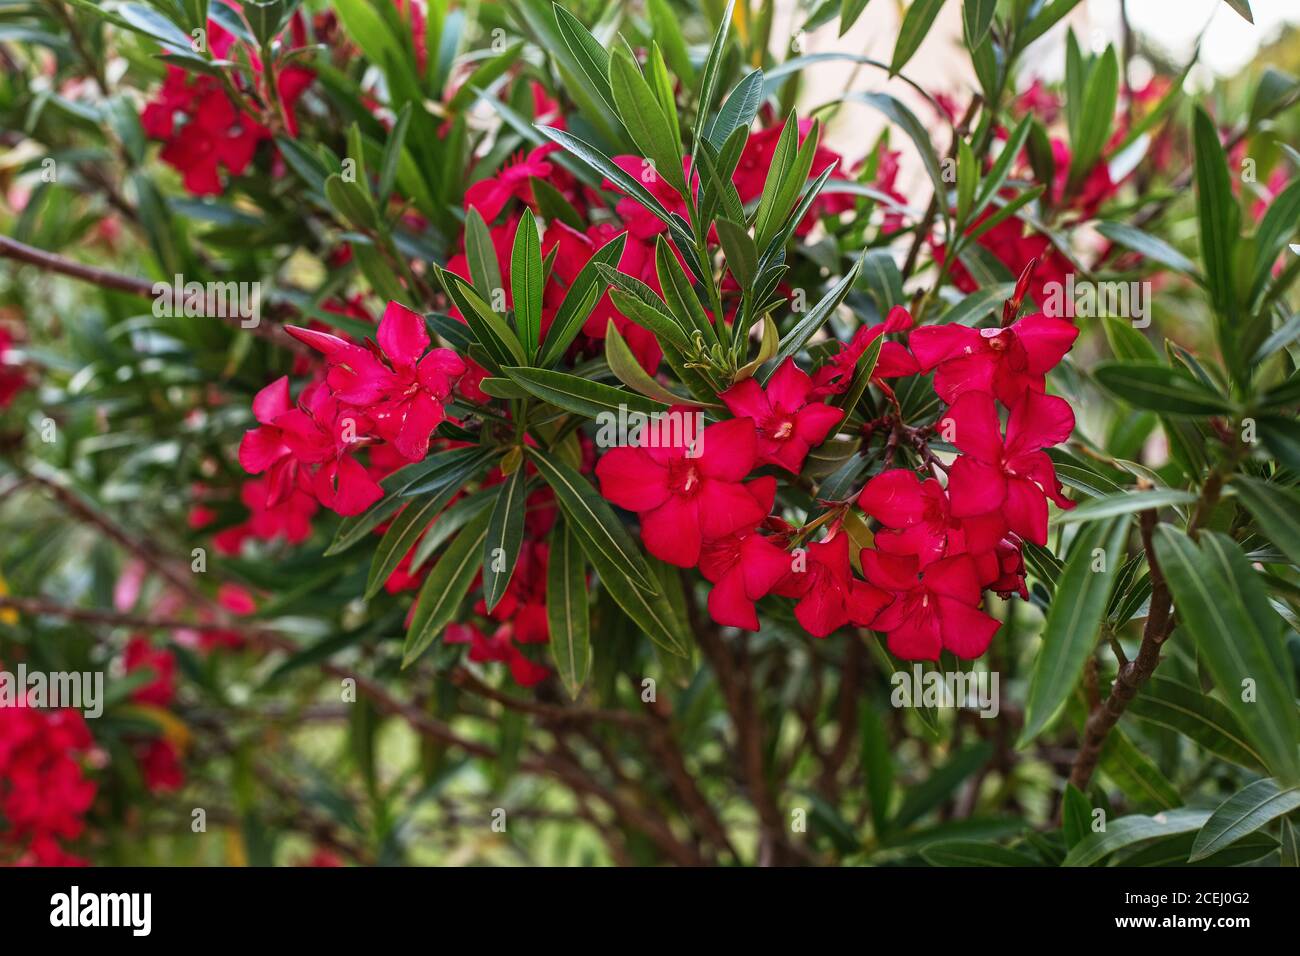 Red Rhododendron blooming (Rhododendron scabrum) in the garden Stock Photo